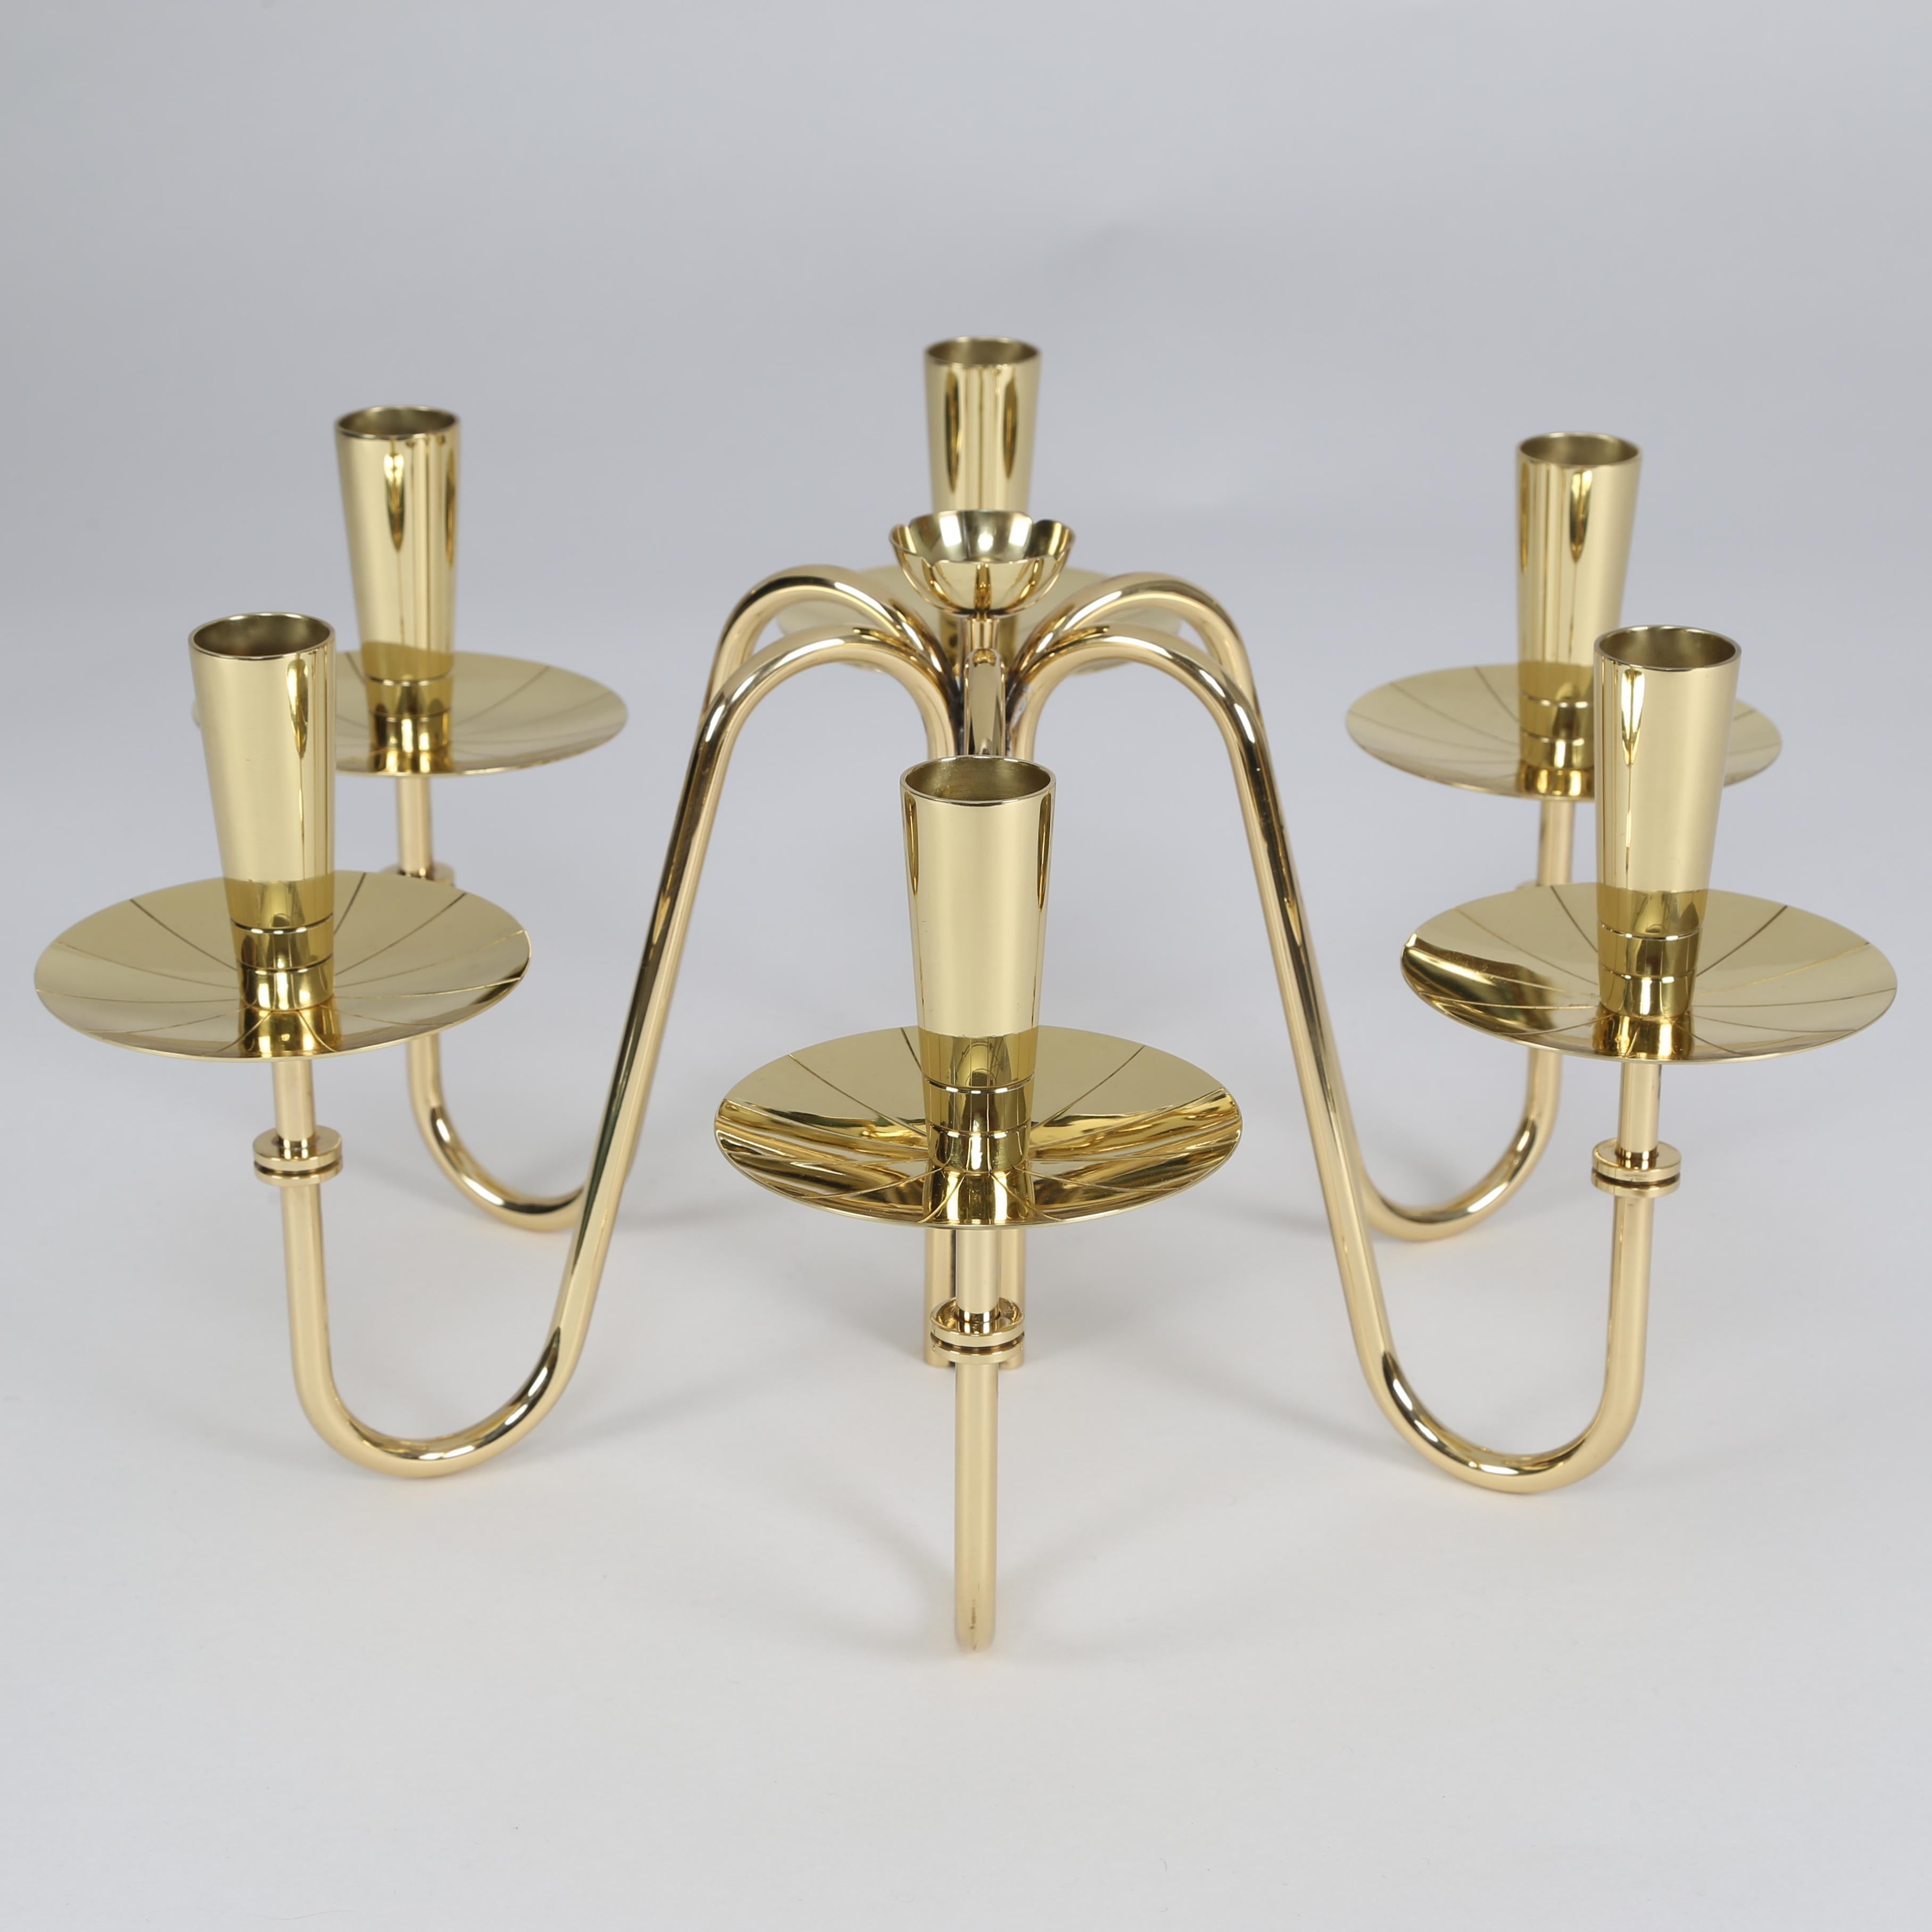 Pair of table top candelabra in polished brass, each one like a flower holding 6 candles, with incised radiating lines in the bobeches, by Tommi Parzinger for Dorlyn Silversmiths, American 1950s. These forms with 6 candles are rare.